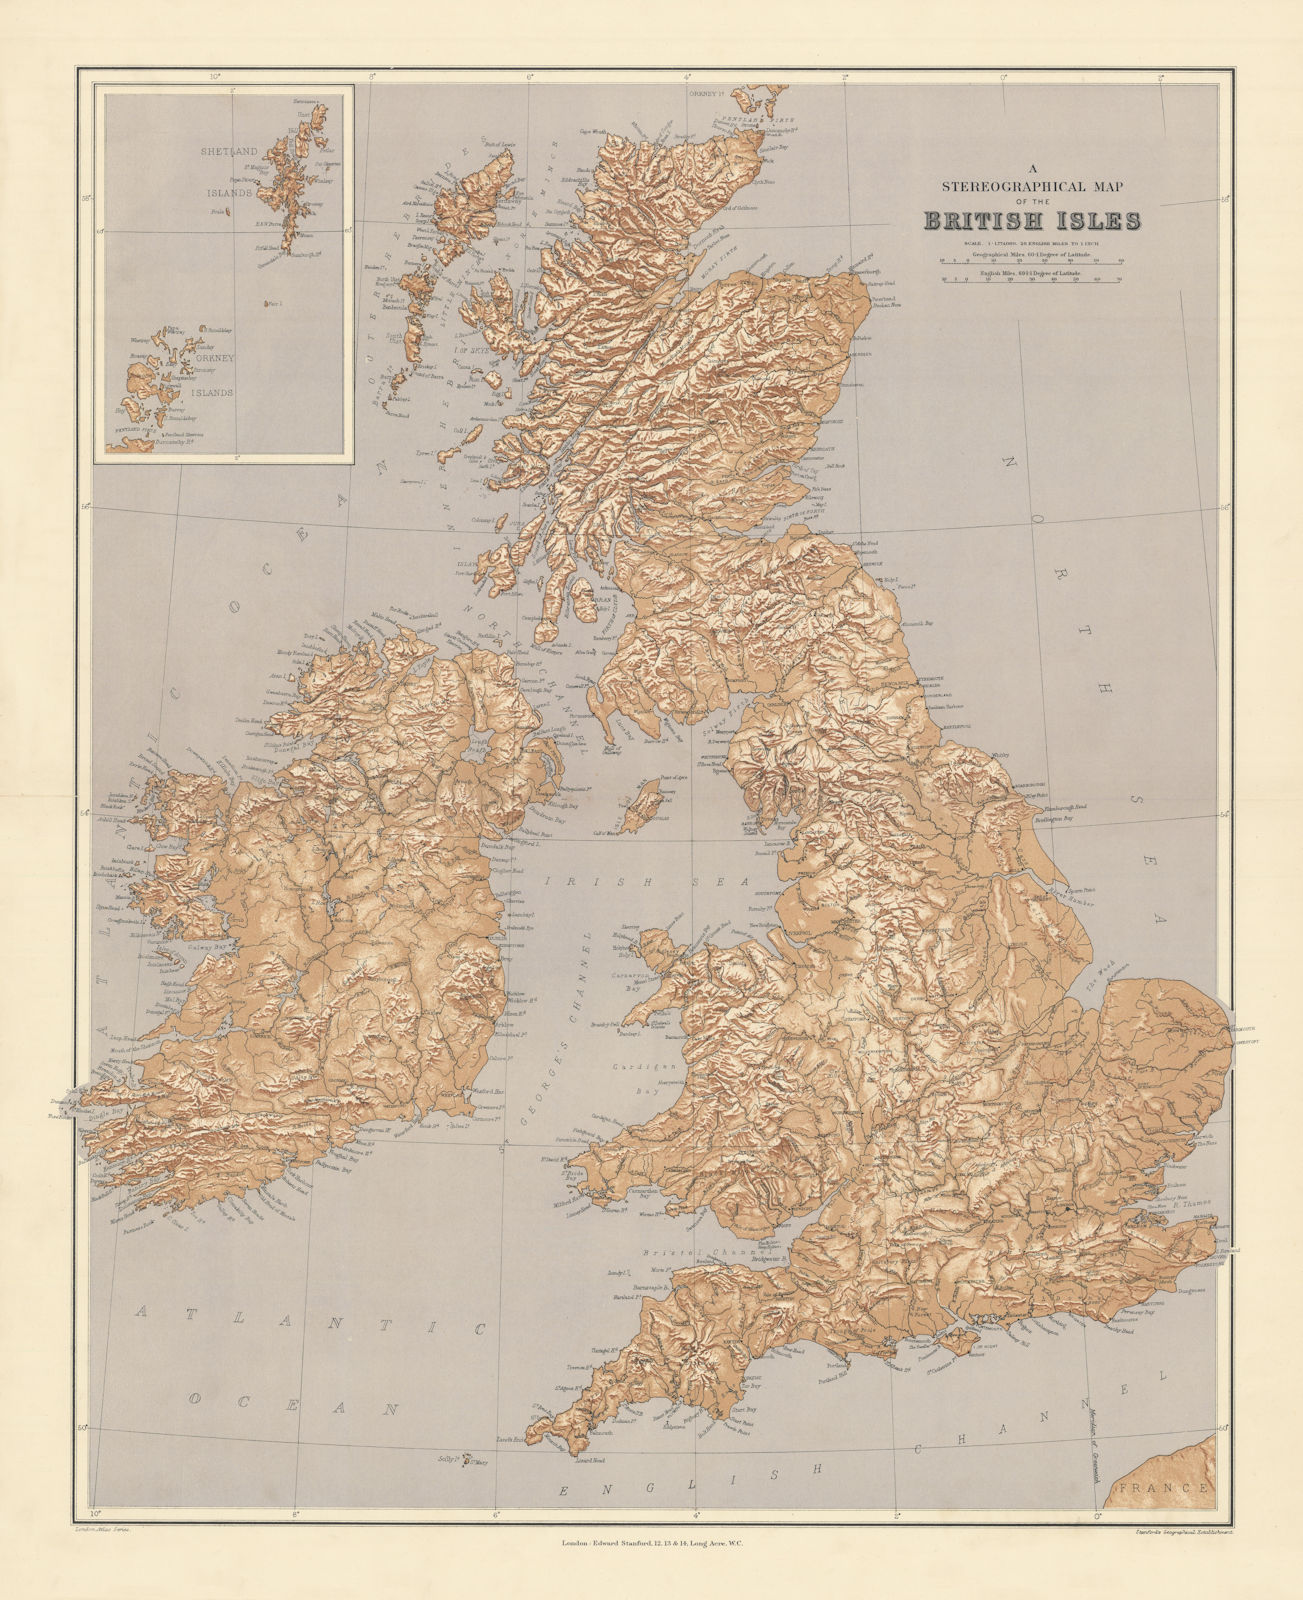 Associate Product British Isles Stereographical. Mountains rivers. Large 65x52cm STANFORD 1904 map